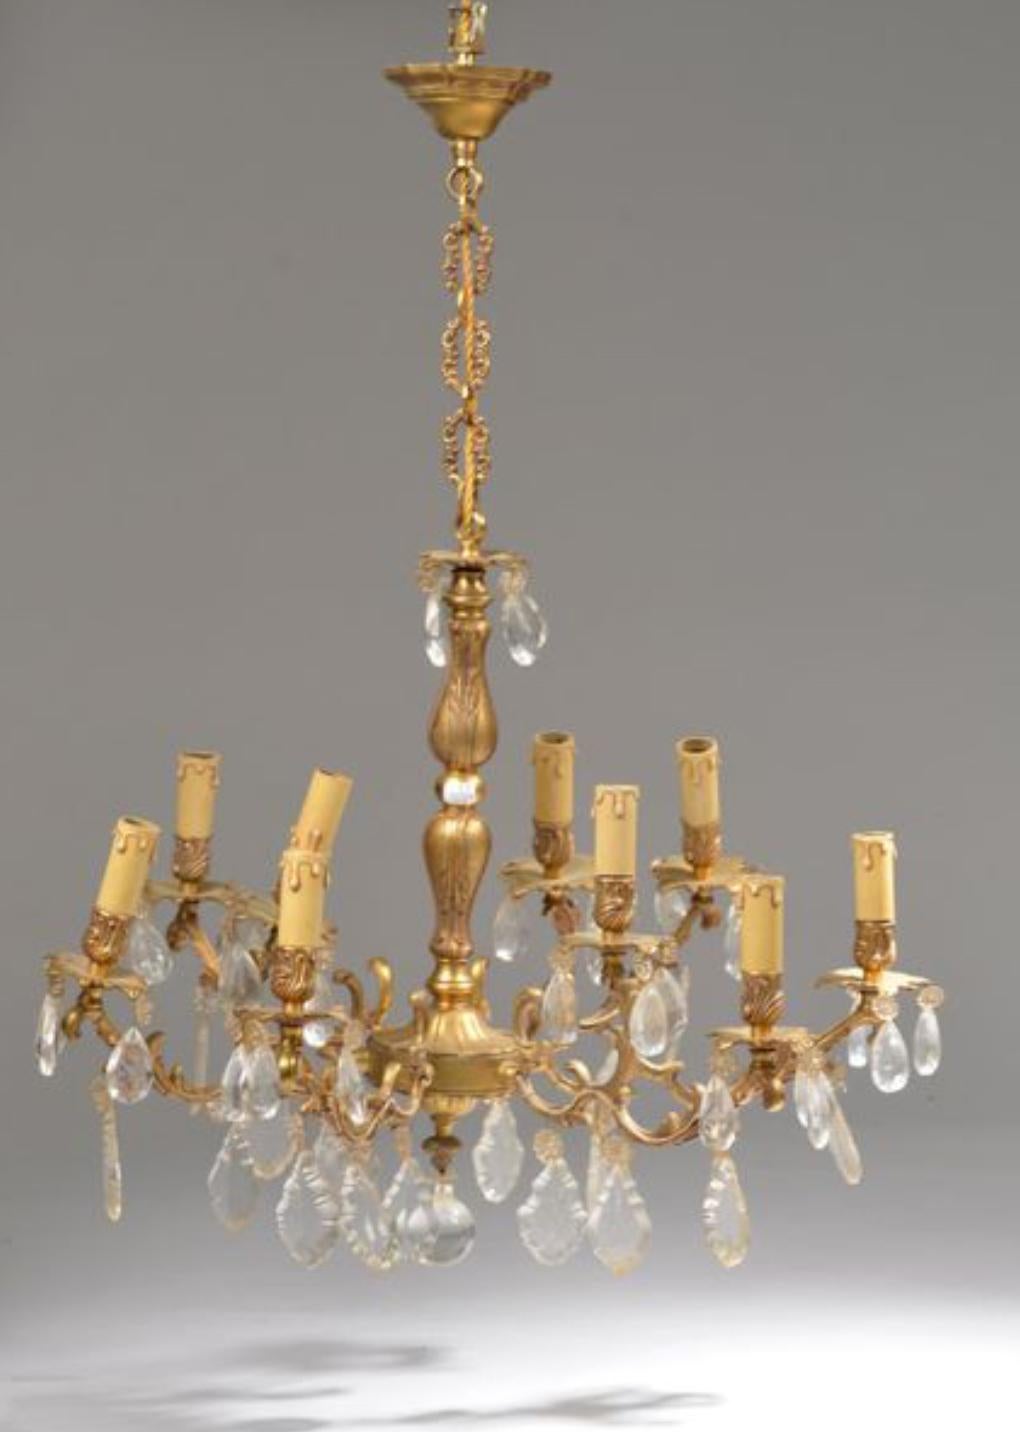 Bronze chandelier with ten lights with crystal decorations.
France, circa 1920
Measures: High: 72 cm - Diameter: 65 cm.